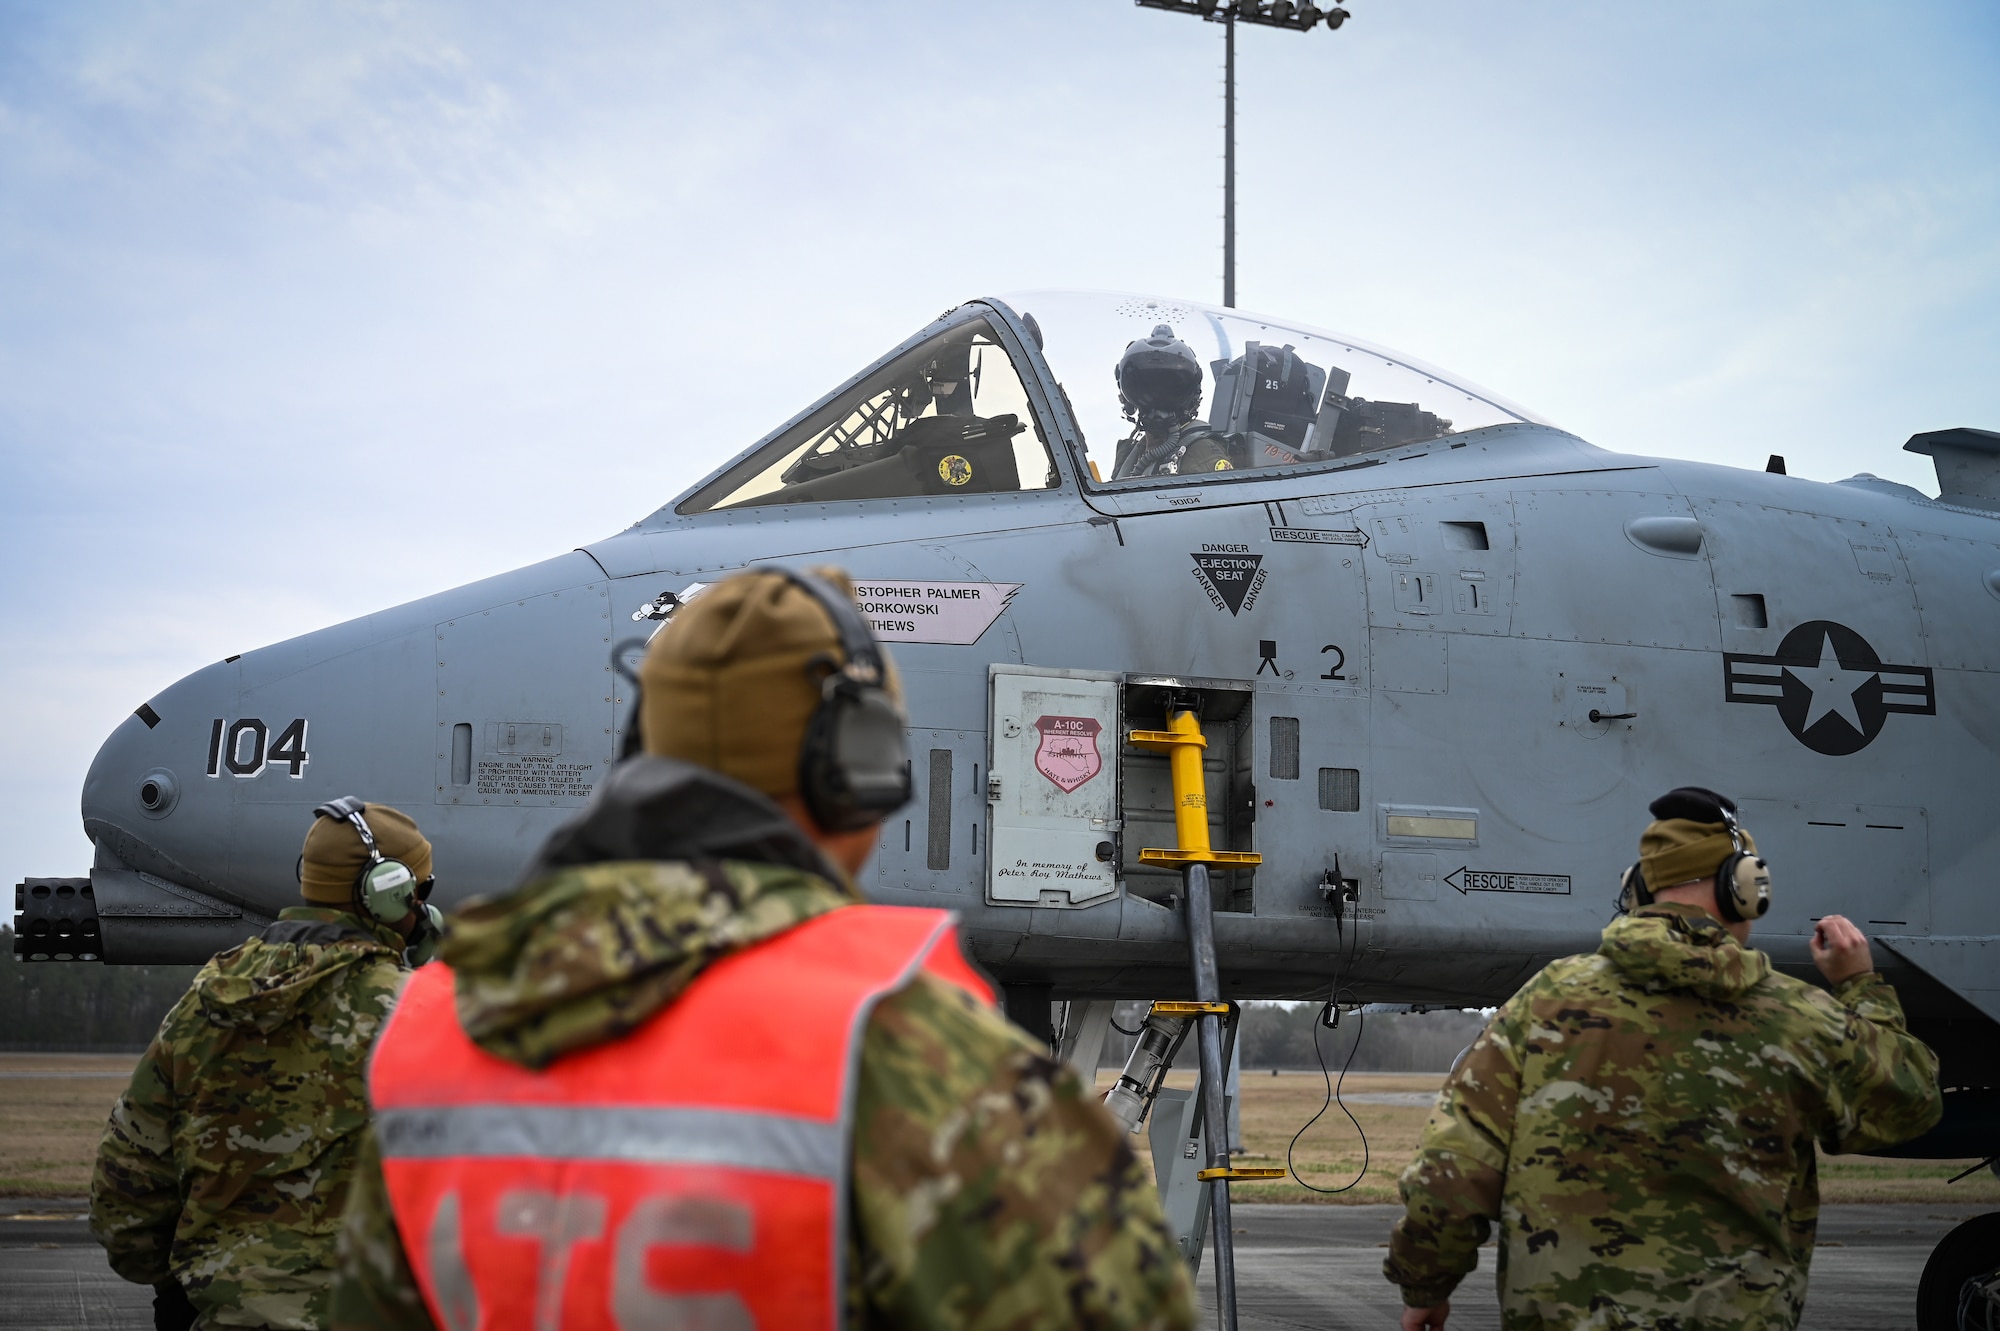 A U.S. Air Force A-10C Thunderbolt II pilot from the 104th Fighter Squadron, Maryland Air National Guard, arrives at Hunter Army Airfield, Georgia, Jan. 25, 2023 to be refueled and rearmed during an integrated combat turn (ICT).